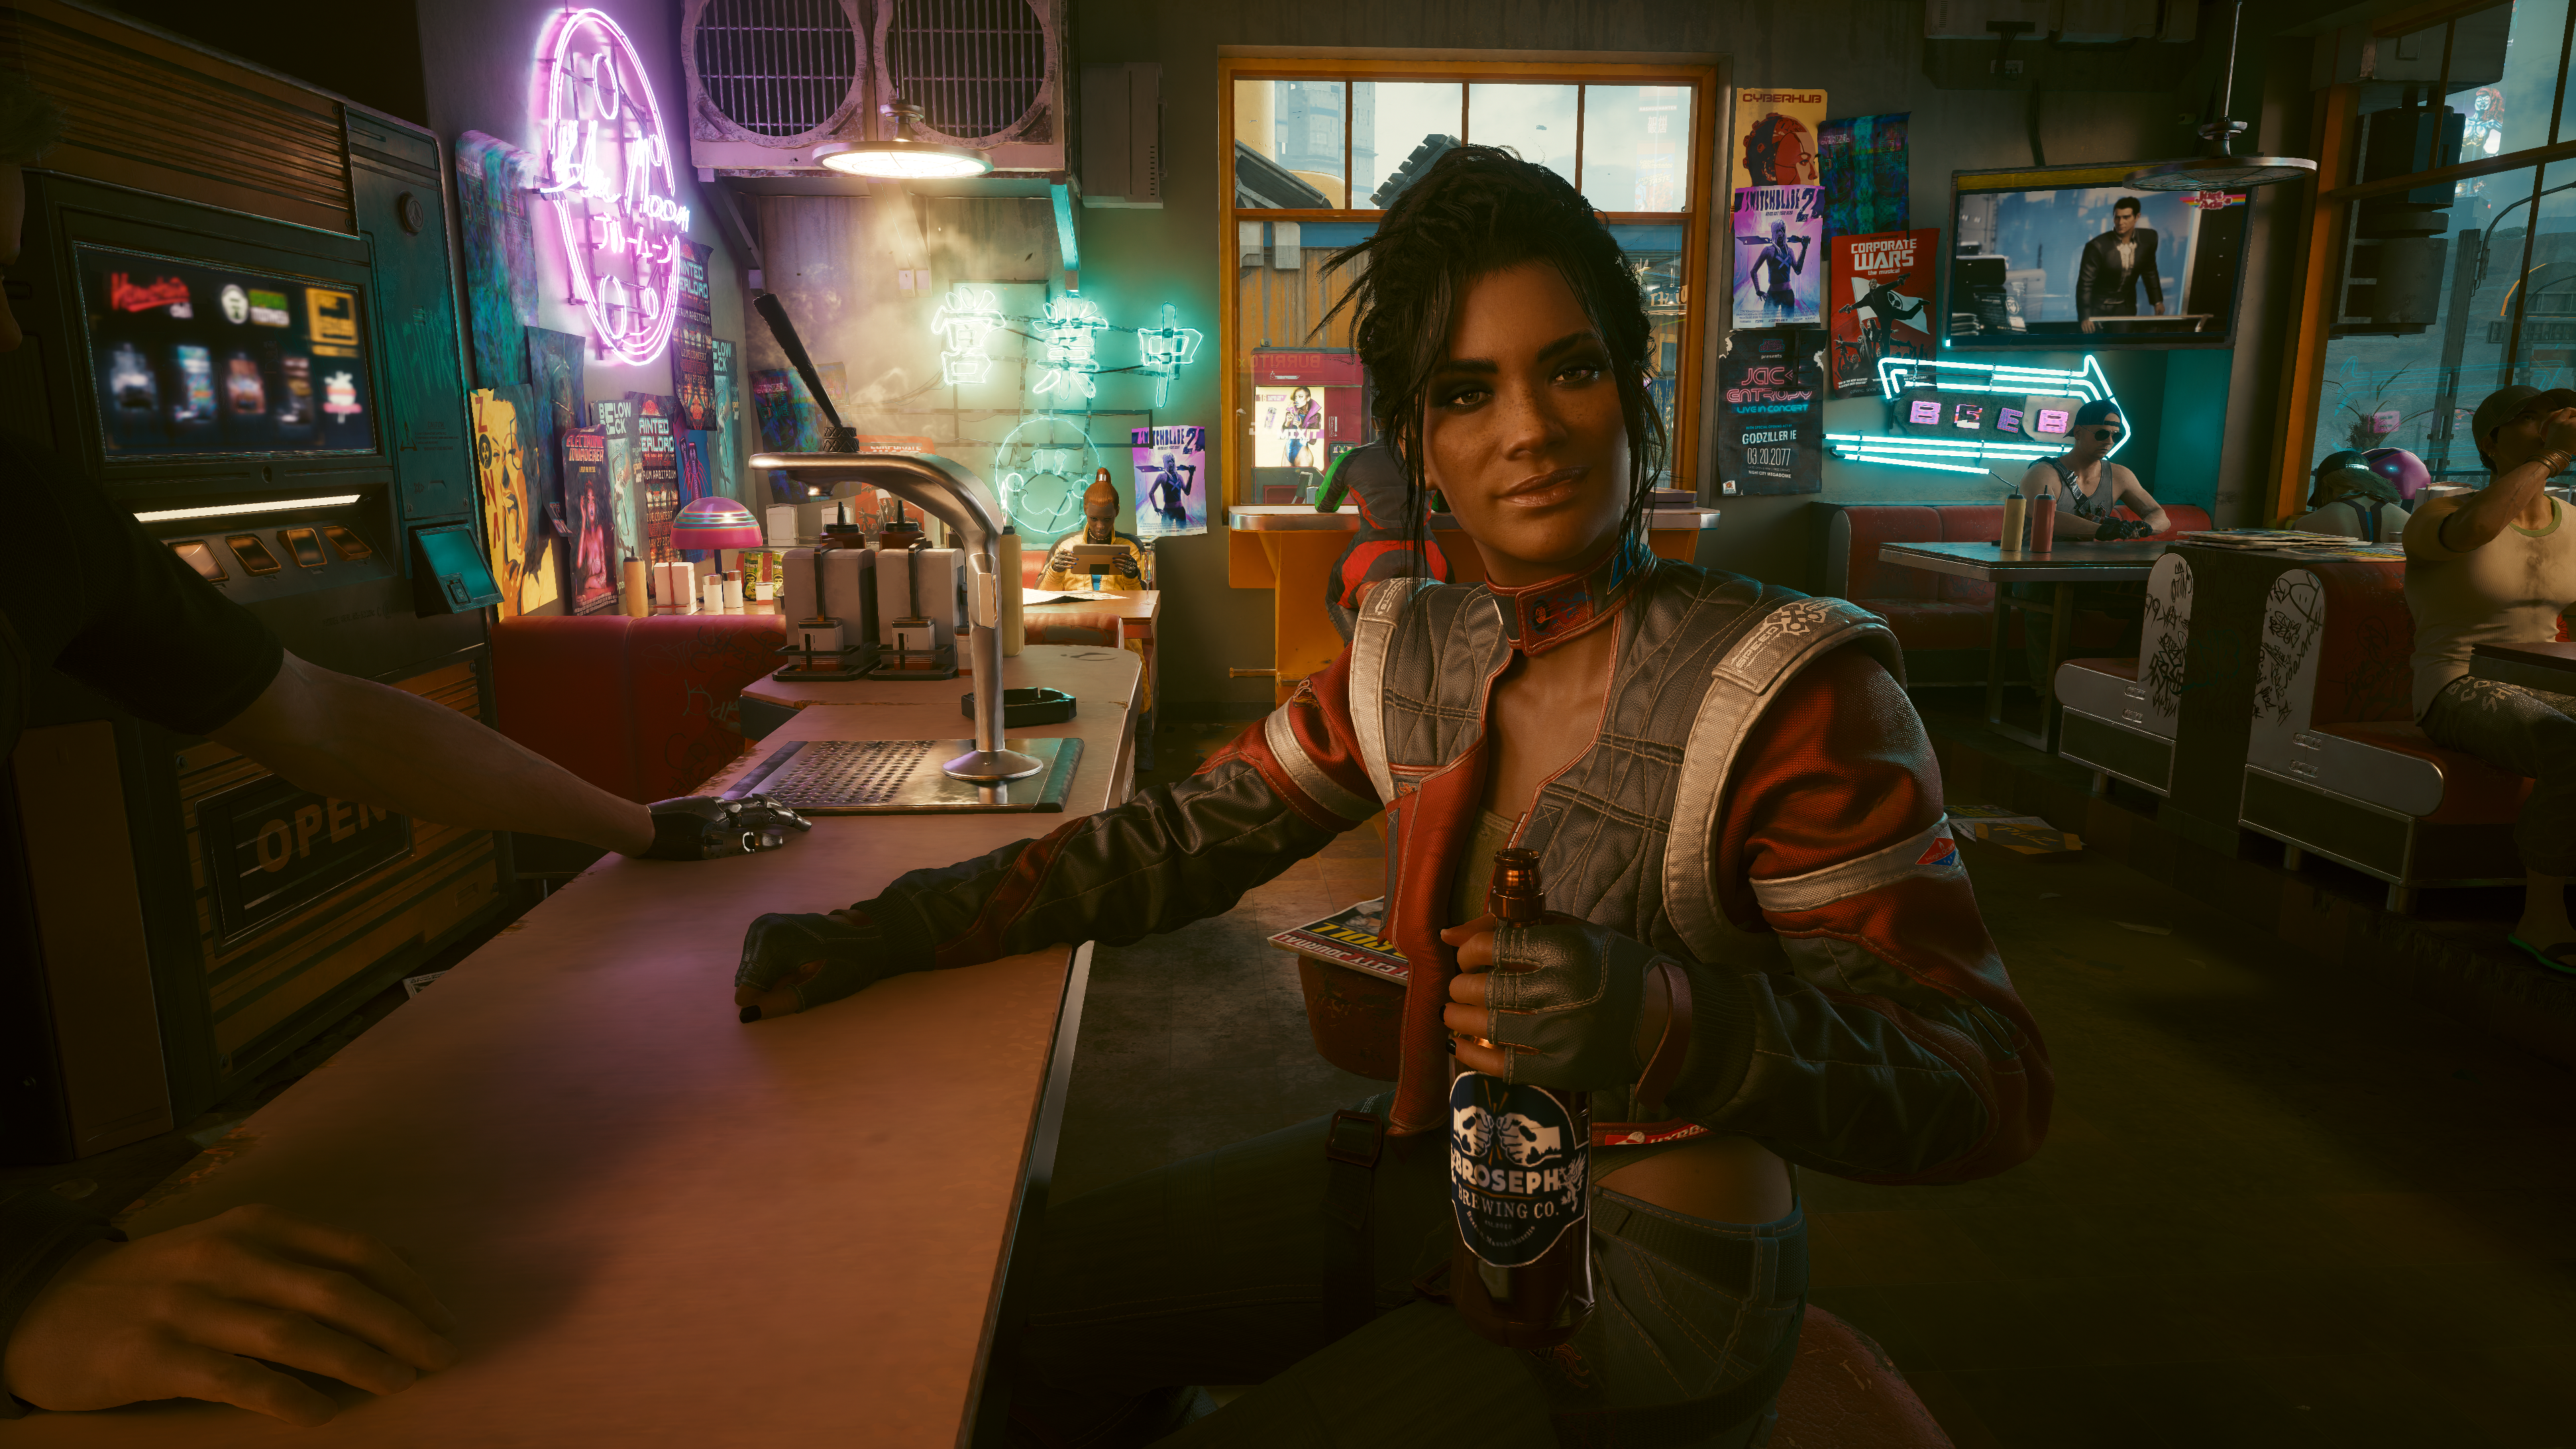 General 3840x2160 cyberpunk 2077 Panam Palmer Cyberpunk 2077 sitting video game characters CGI video game art screen shot video game girls bottles glass bottle Panam Palmer digital art short hair looking at viewer bar neon jacket drink video games closed mouth black nails painted nails sign TV poster POV